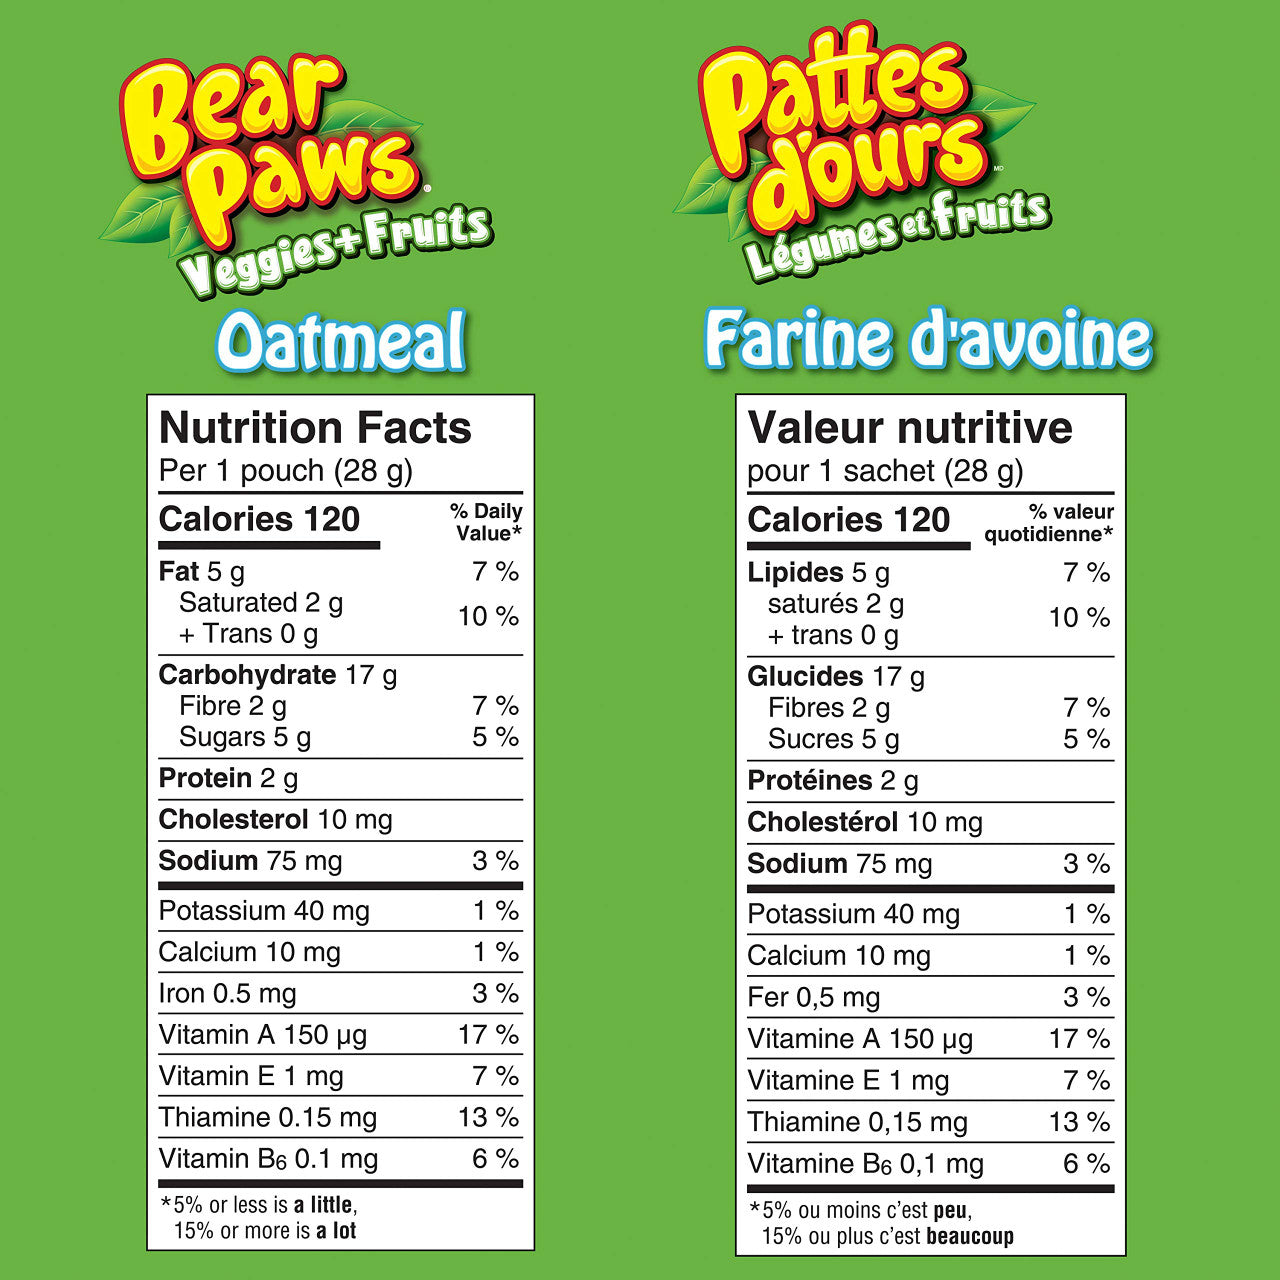 Bear Paws Fruit & Veggies Oatmeal Cookies, 168g/5.9 oz., {Imported from Canada}